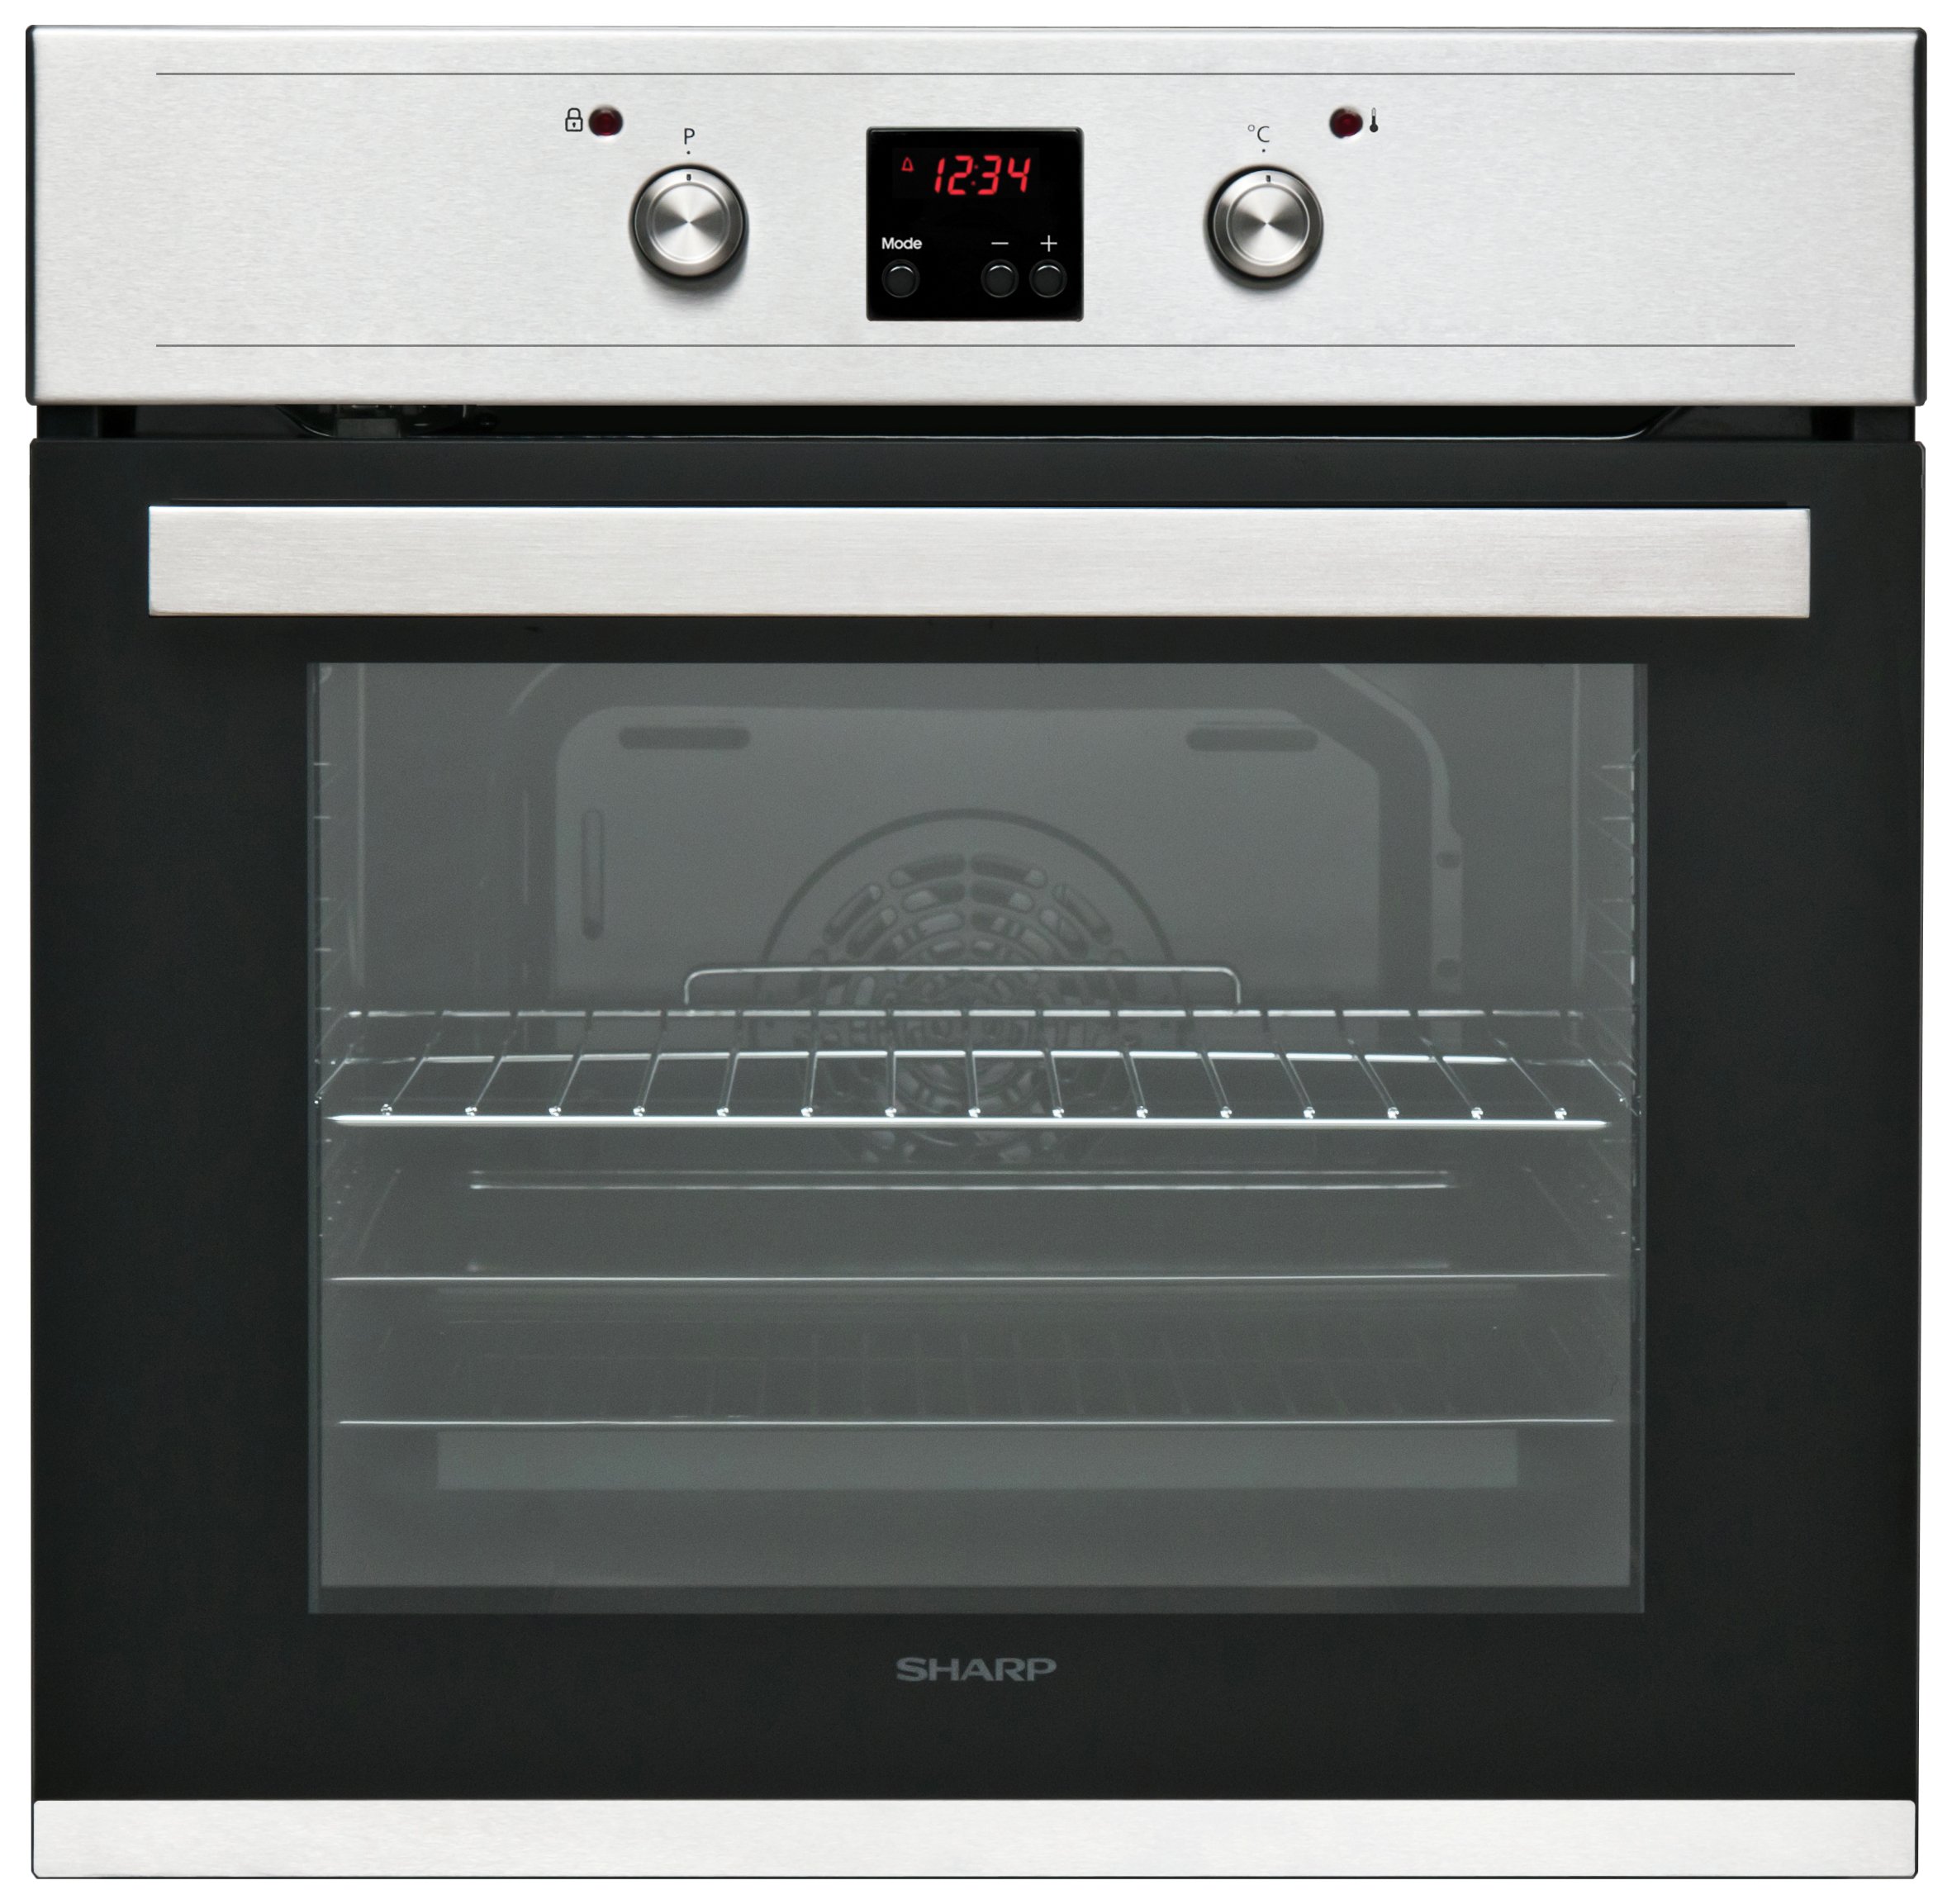 Sharp K-61D27IM1 Pyrolytic Electric Built In Oven review